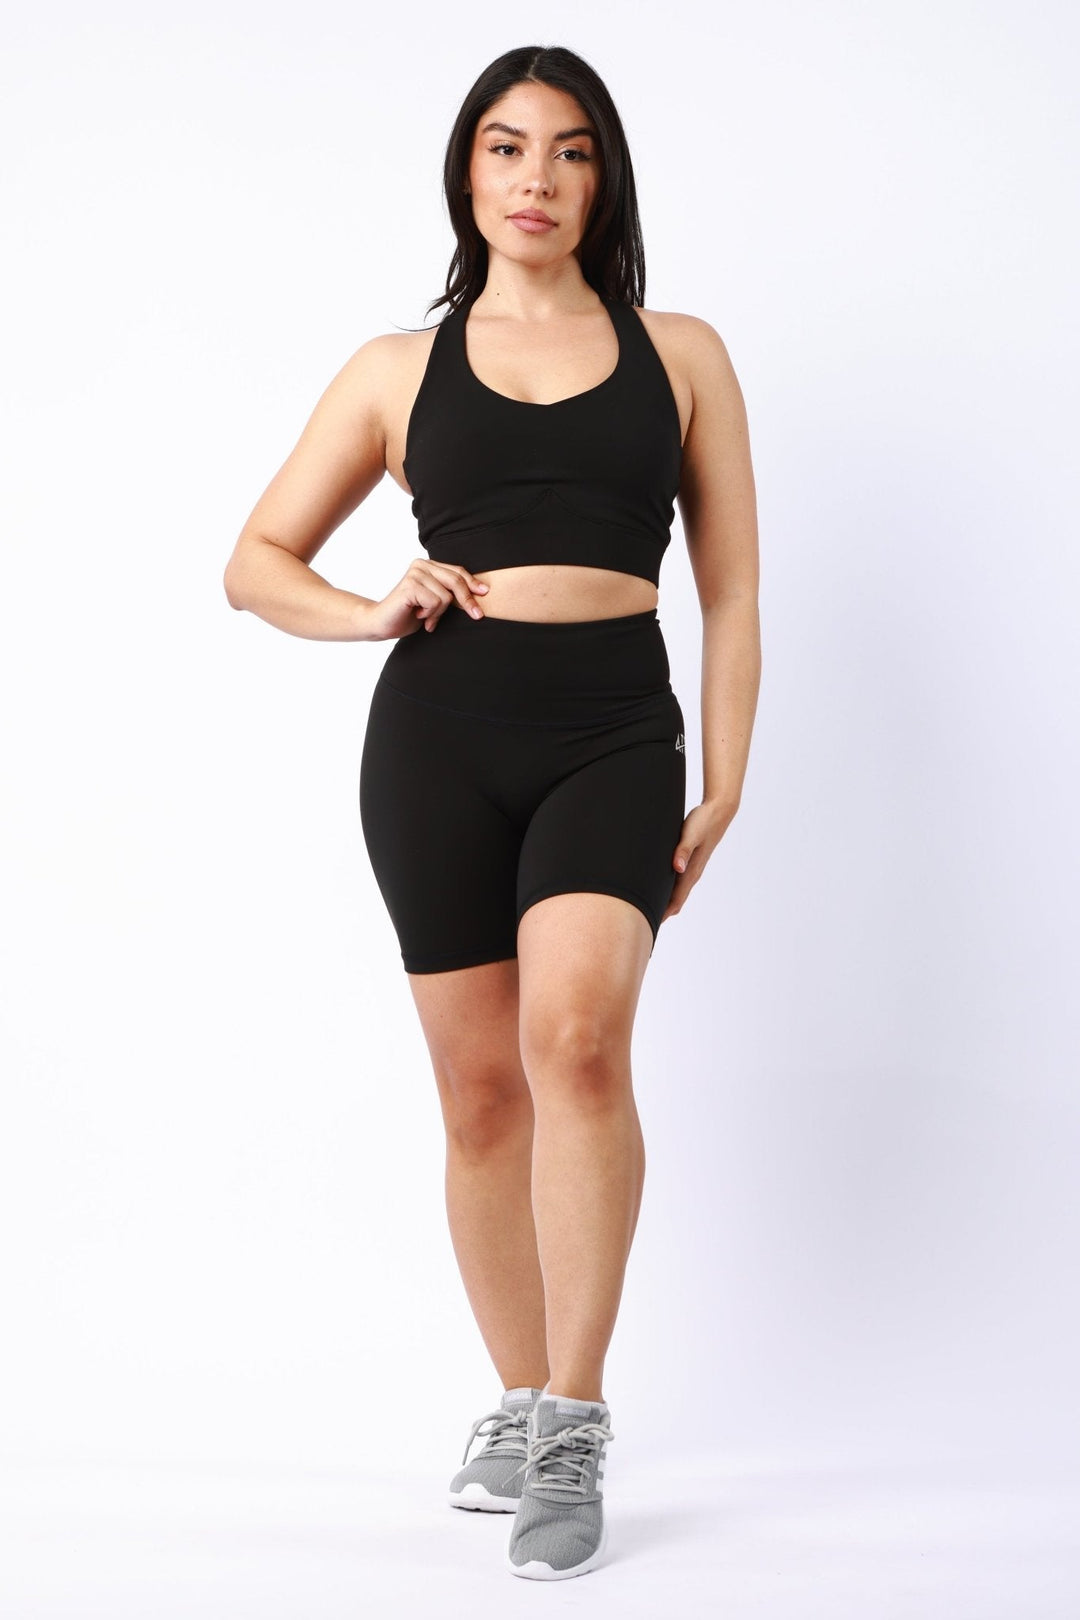 Athletic Women's Shorts With No Pockets In Black - attivousa Free Shipping over $75 Womens Activewear Attivo